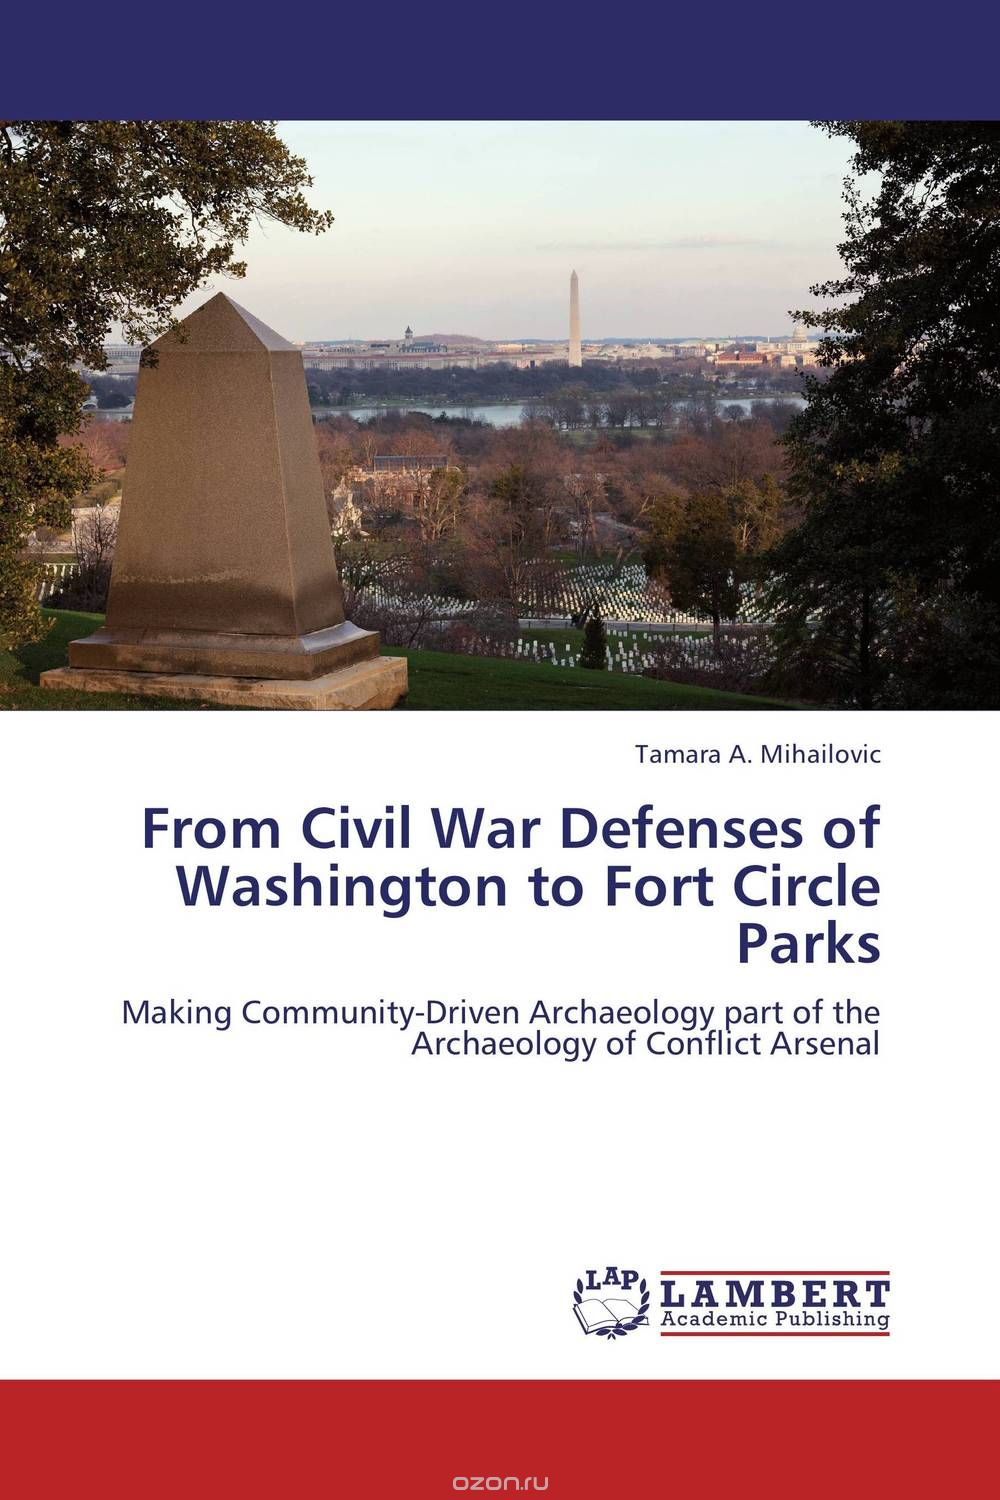 From Civil War Defenses of Washington to Fort Circle Parks